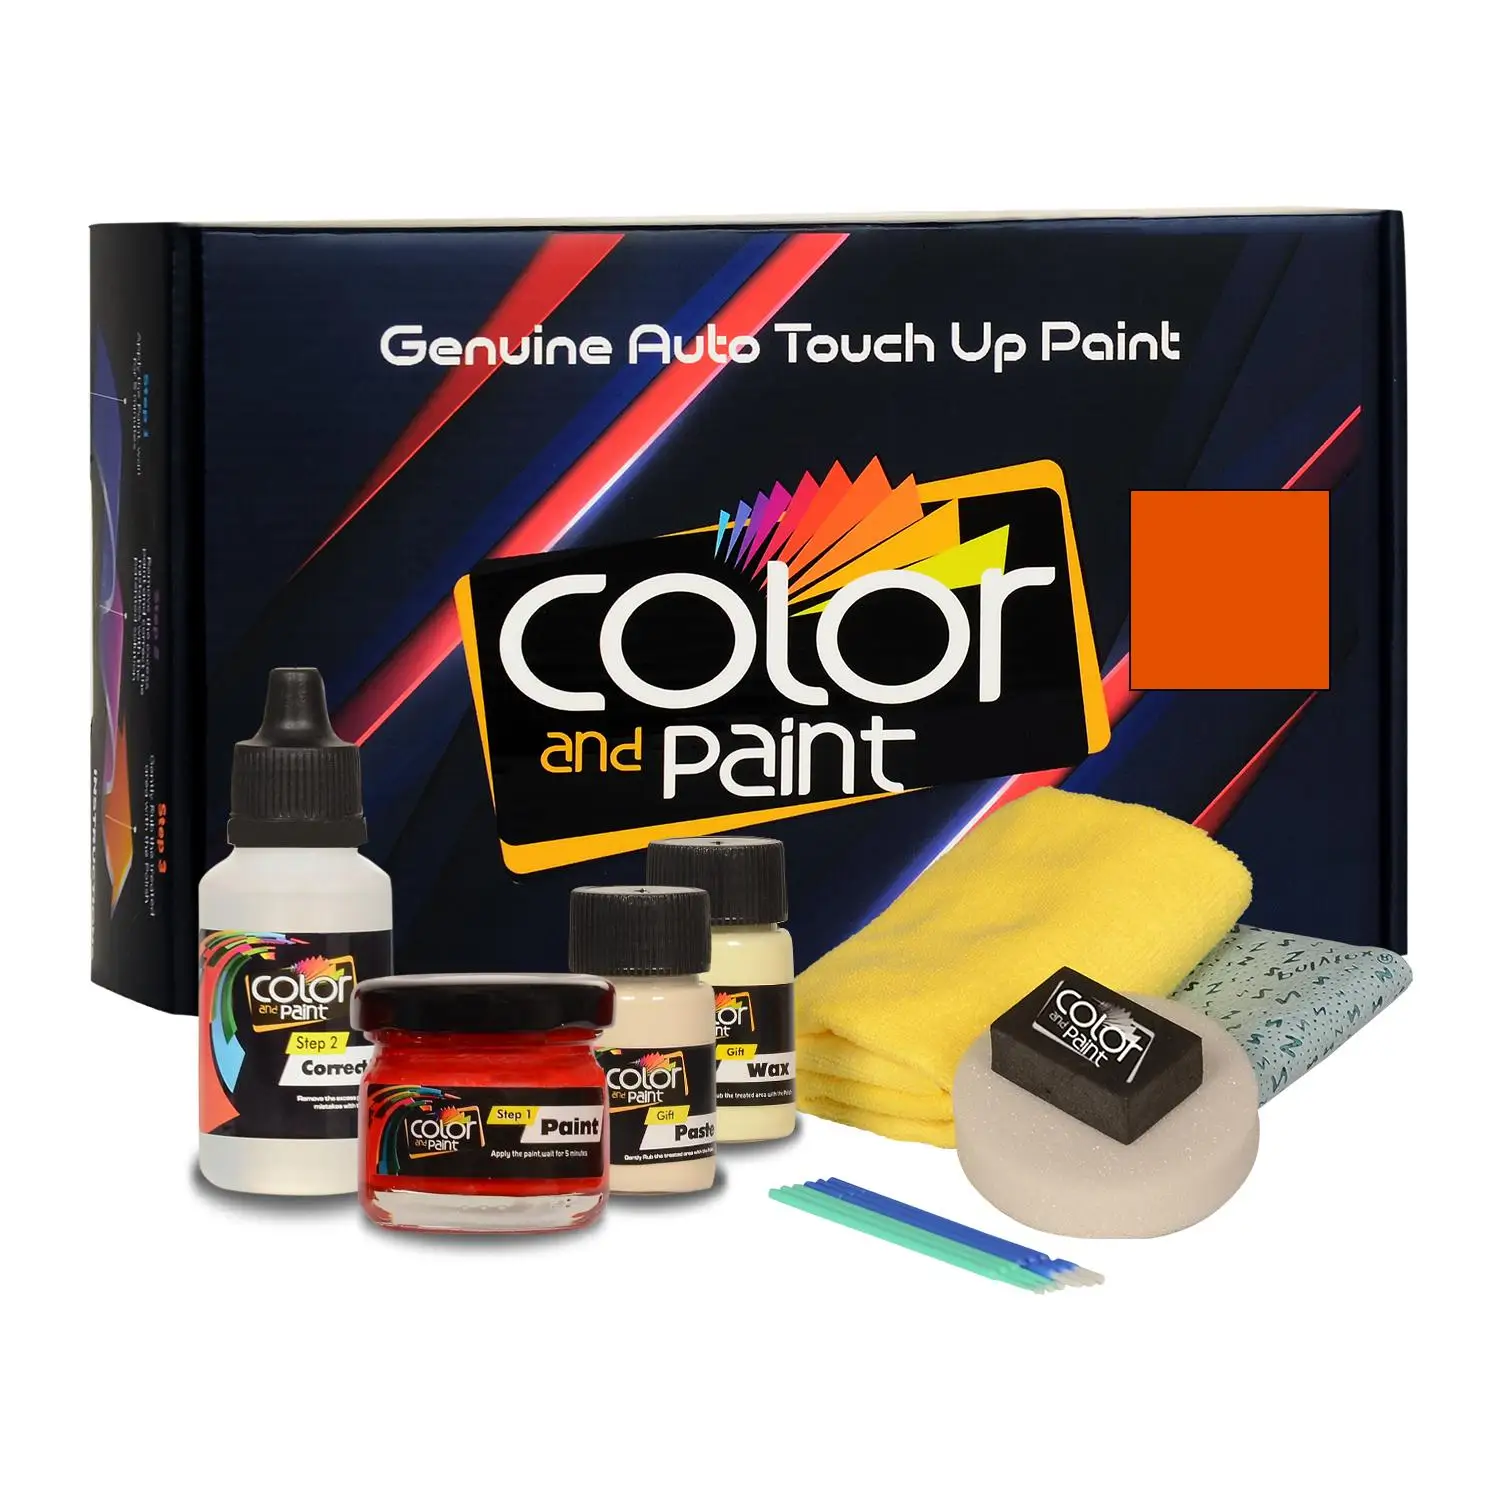 

Color and Paint compatible with Volkswagen Automotive Touch Up Paint - GELB - LN1B - Basic Care